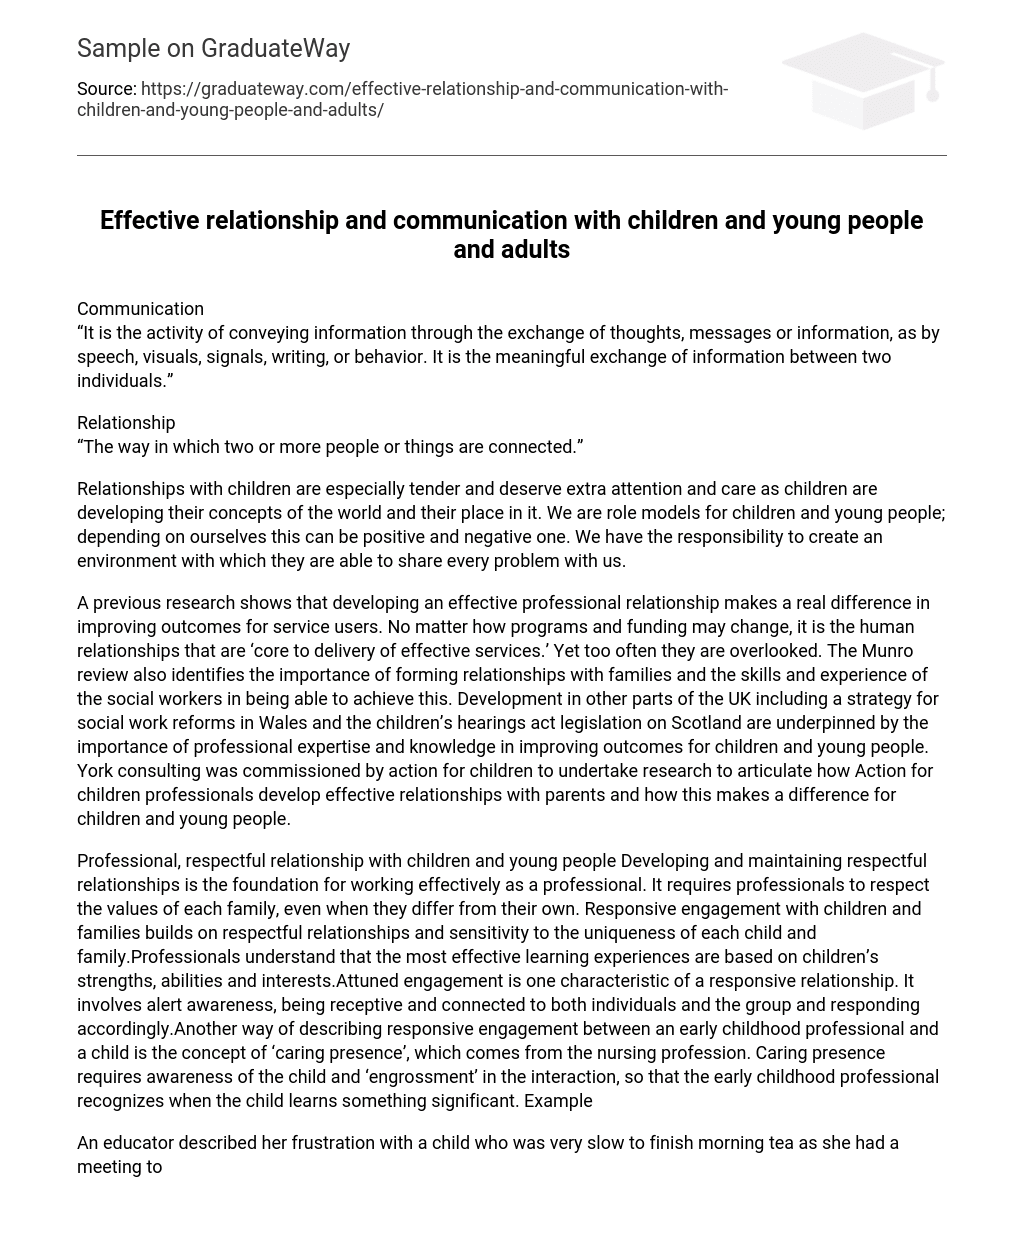 Effective relationship and communication with children and young people and adults